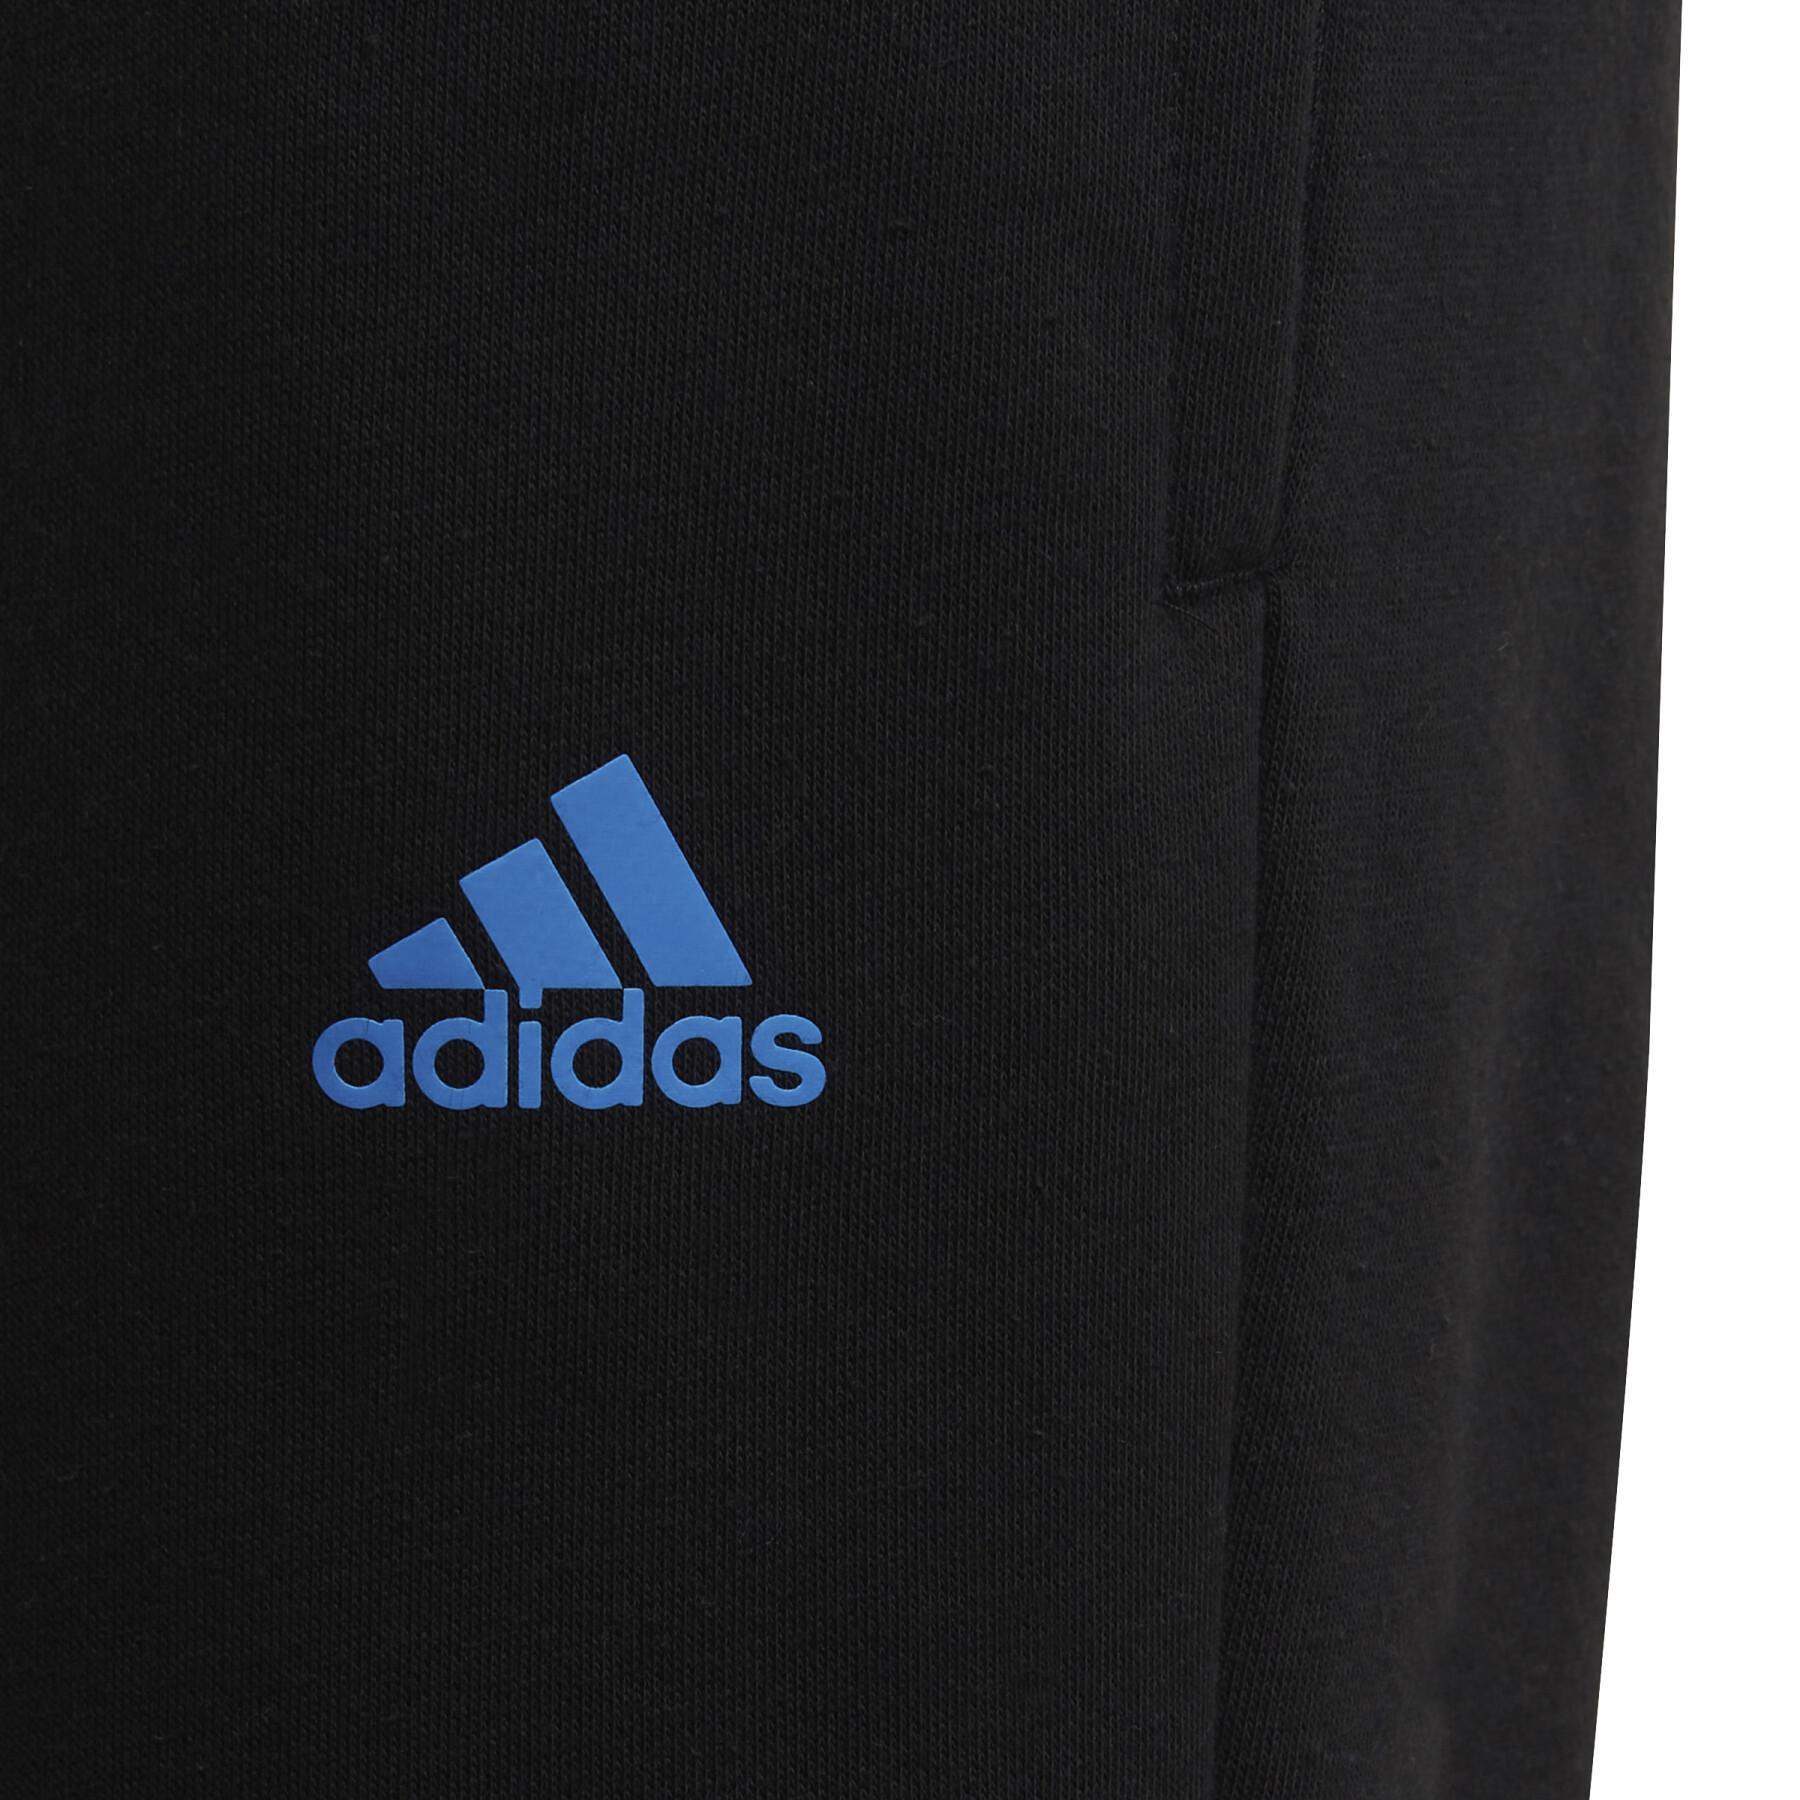 Girl's tracksuit adidas Badge of Sport